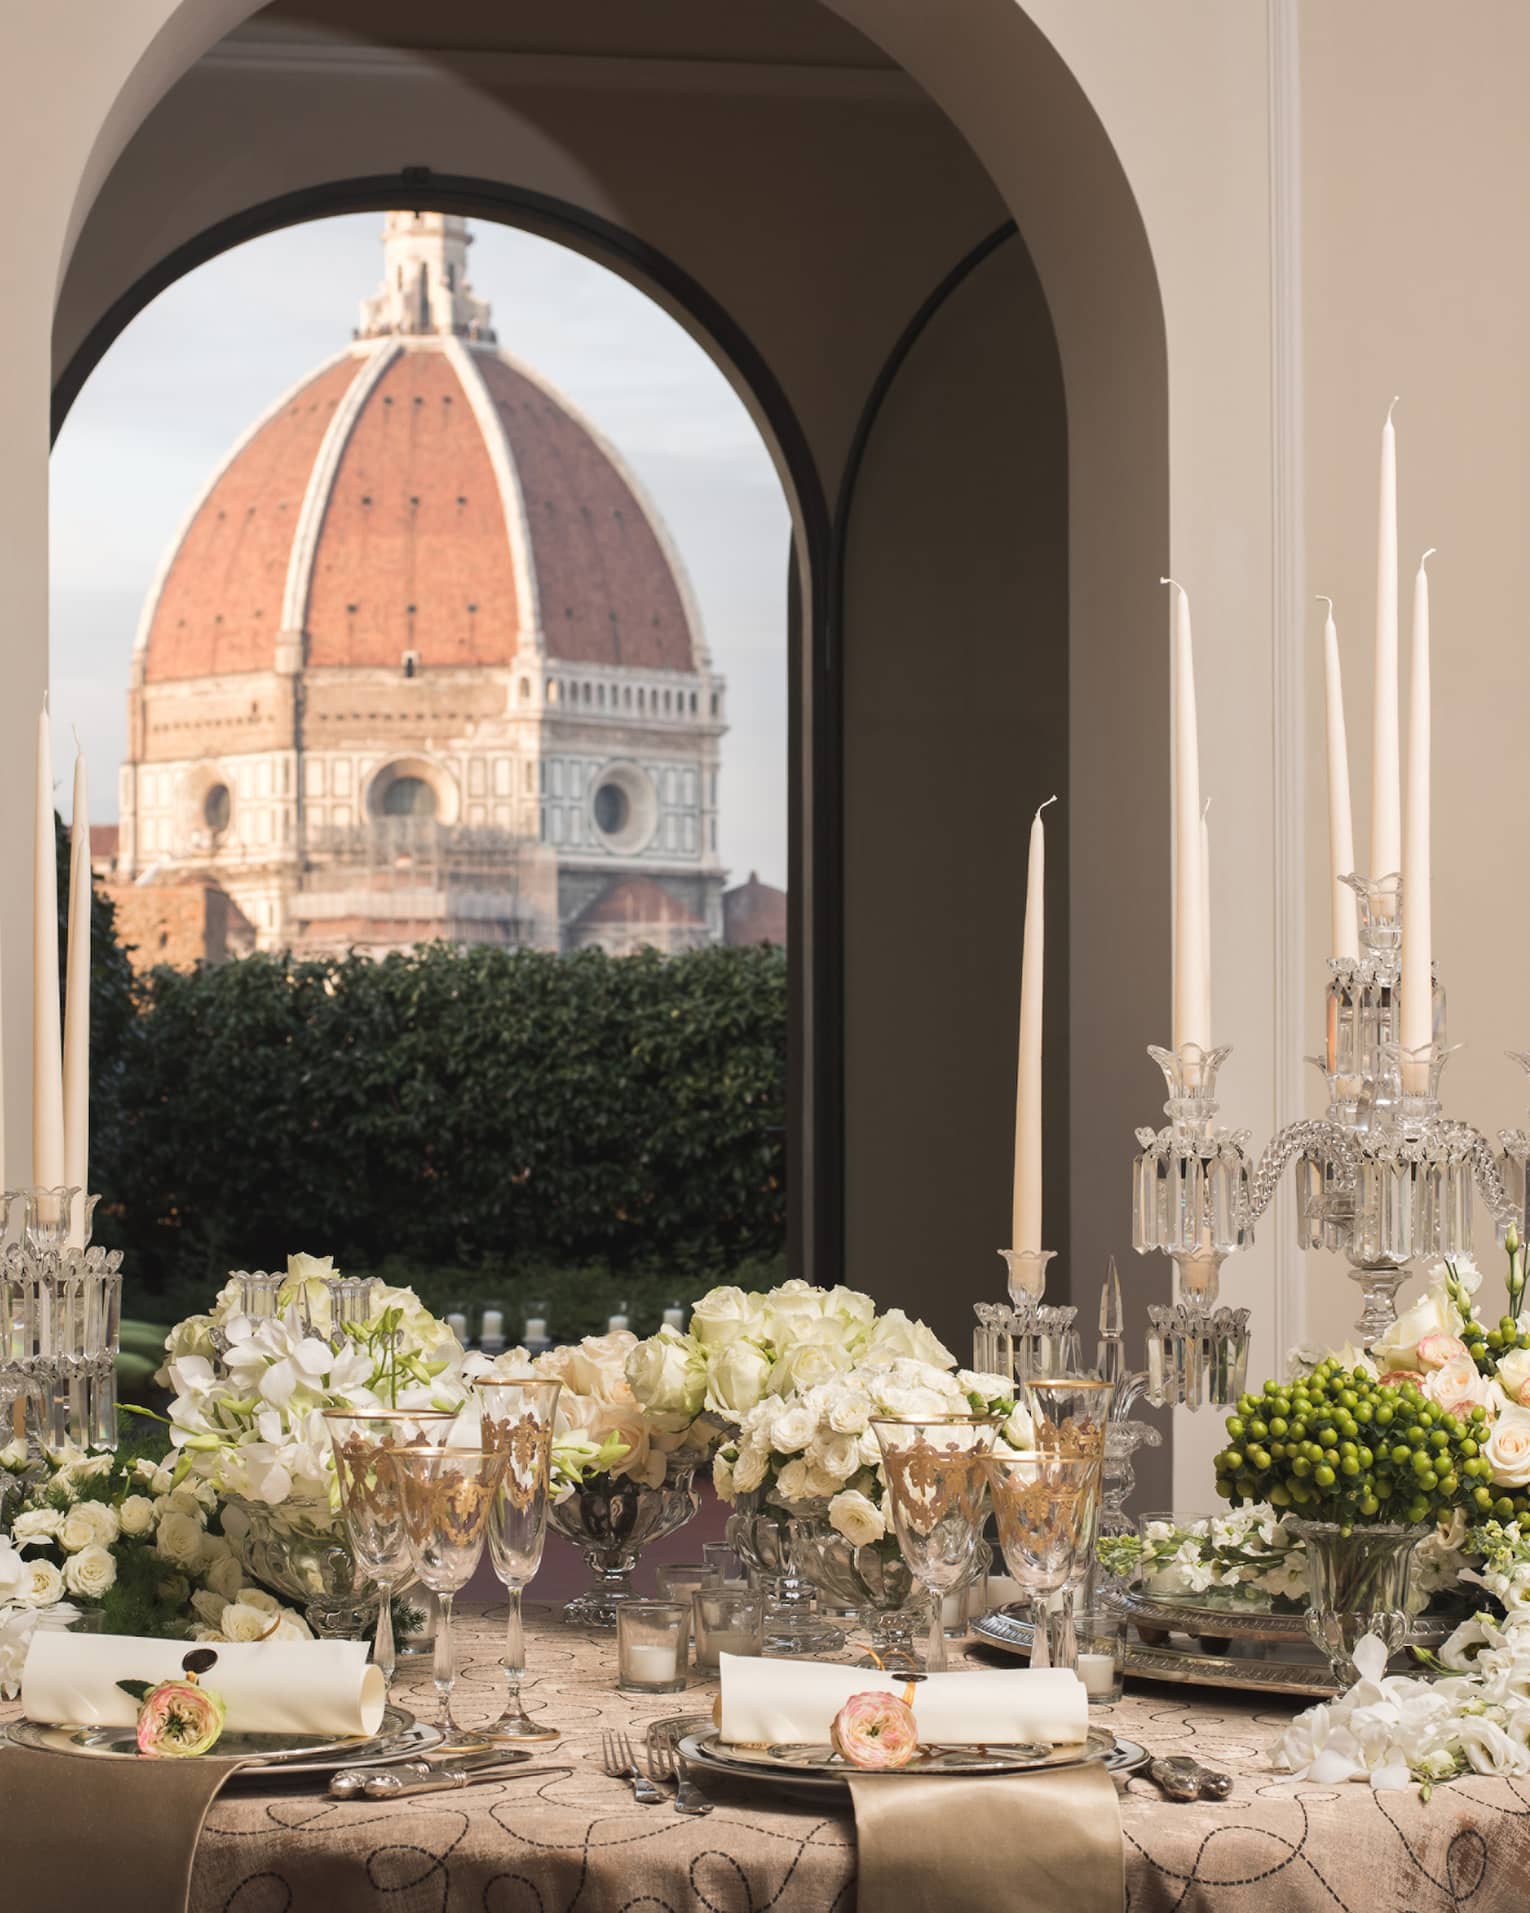 White roses, flowers on elegant banquet table under pillows, Duomo views